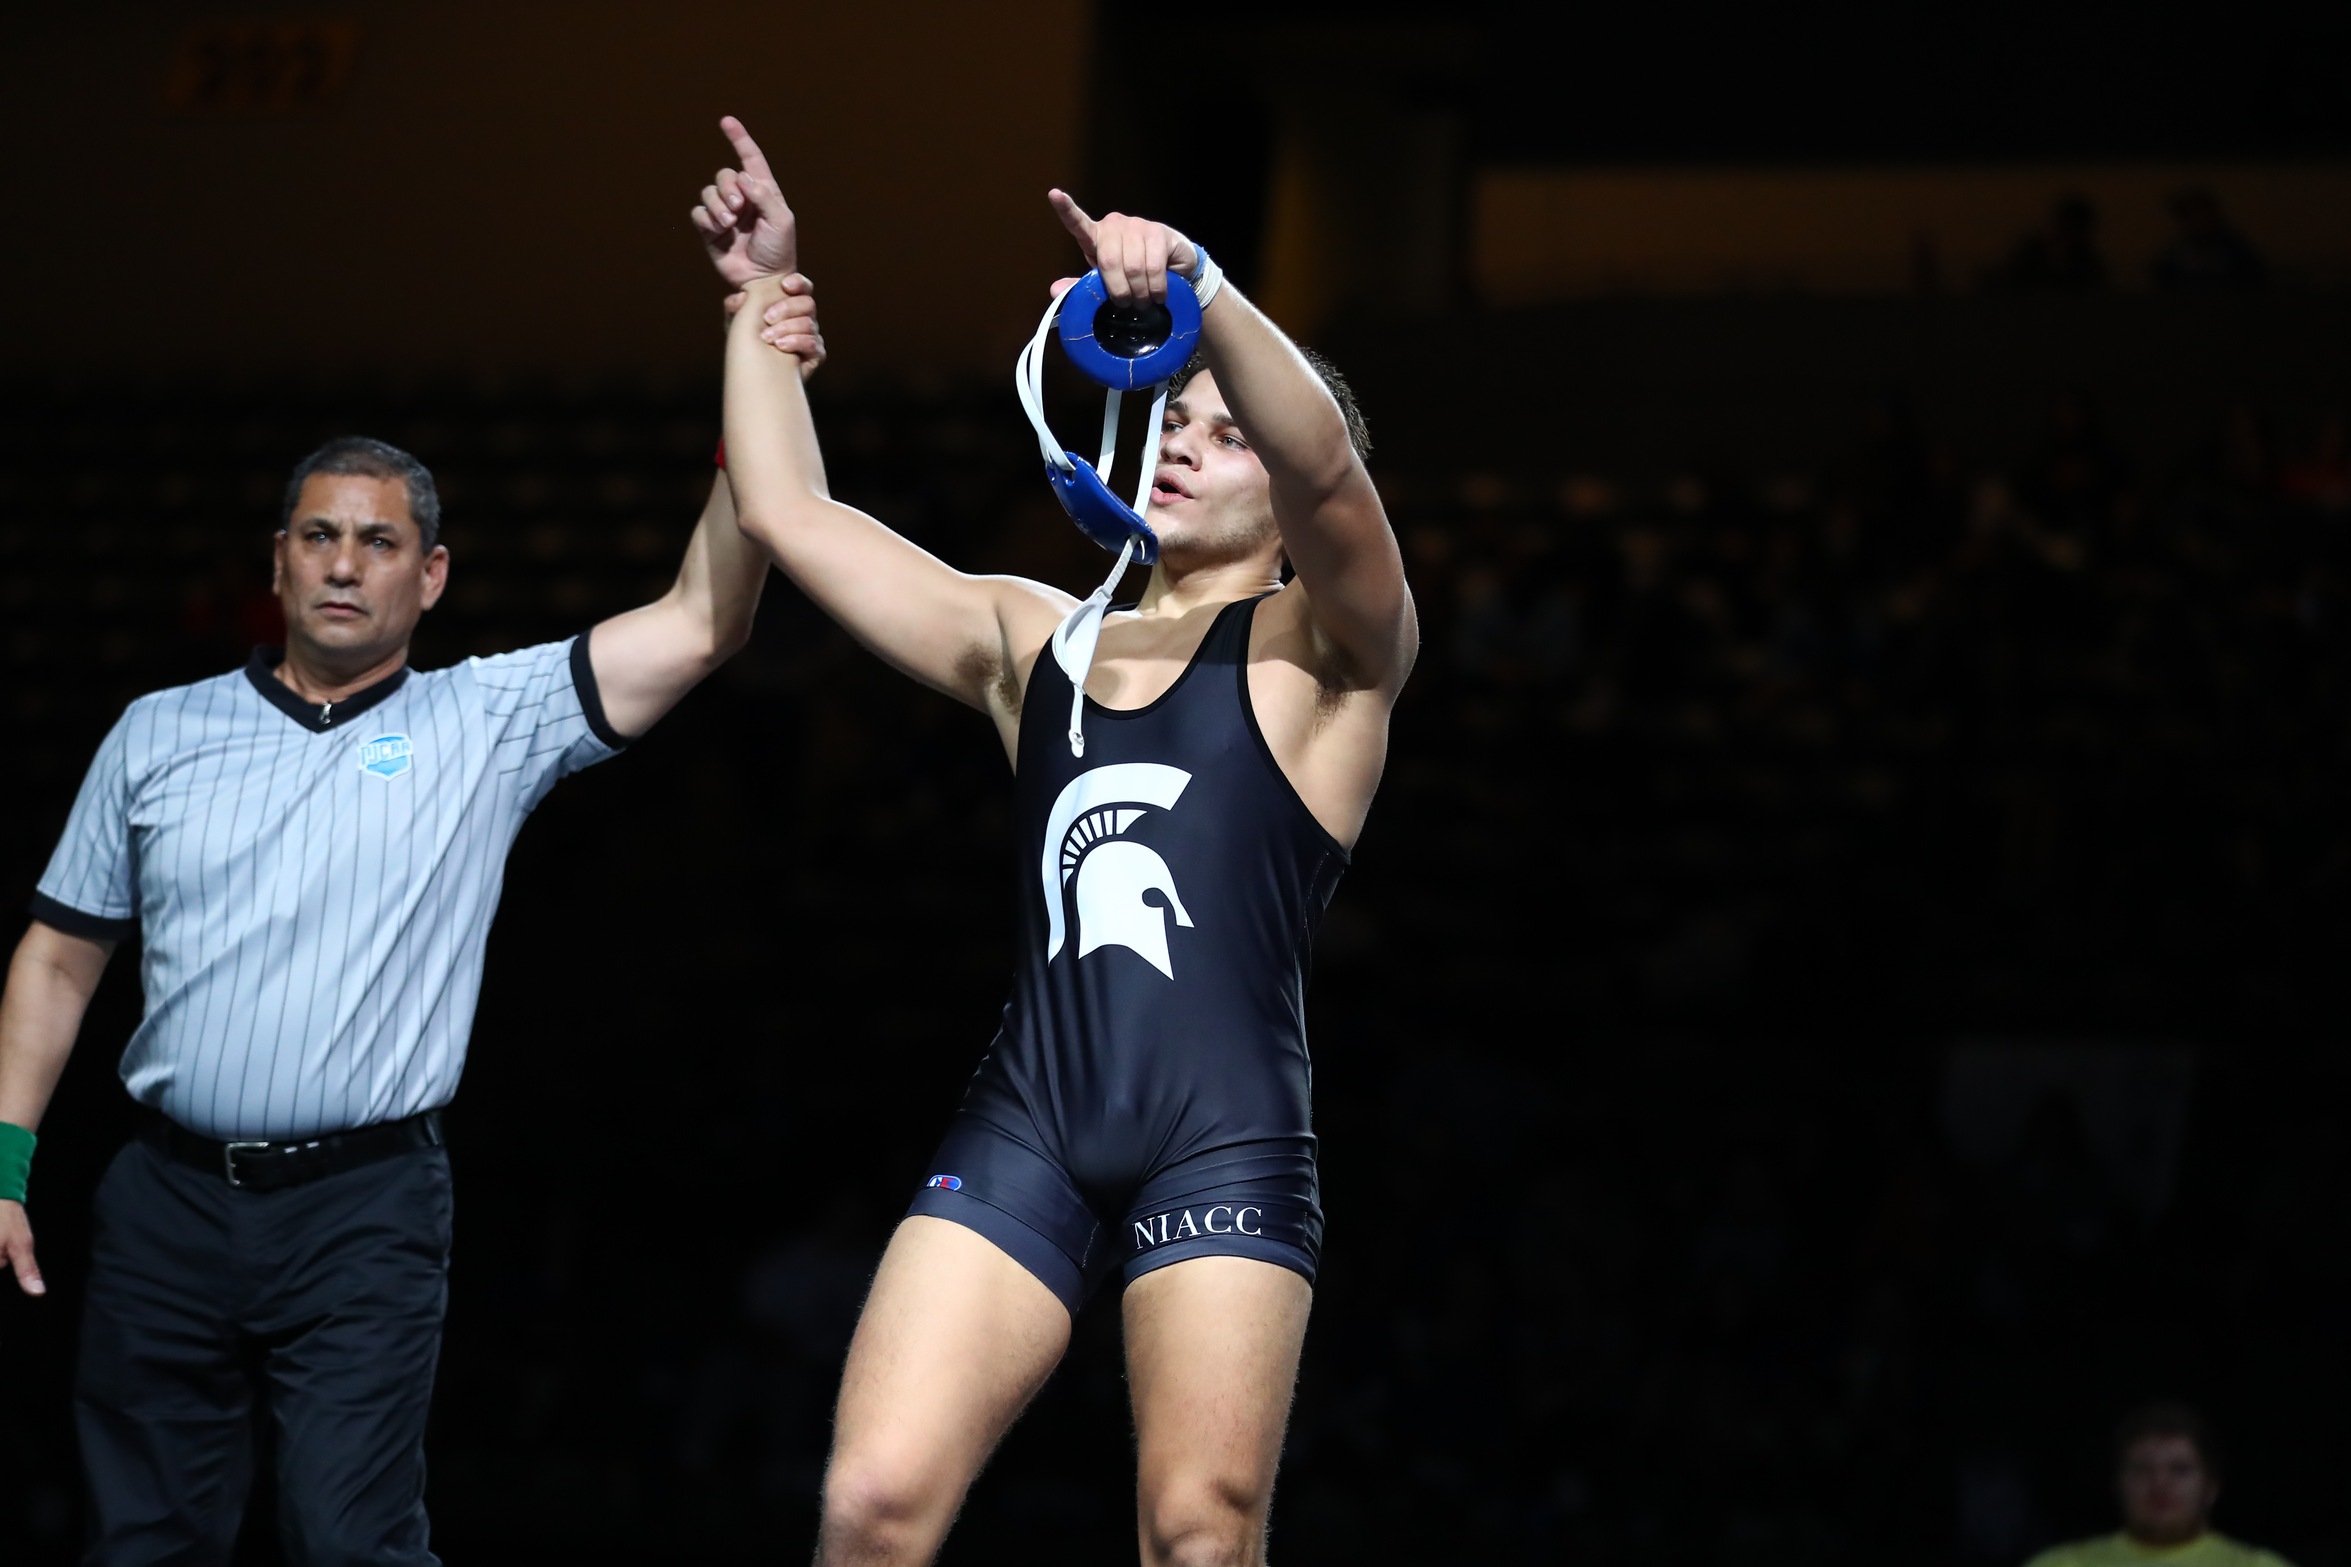 NIACC's Jose Valdez gets his hand raised after claiming the 2022 NJCAA 197-pound national title in Council Bluffs.